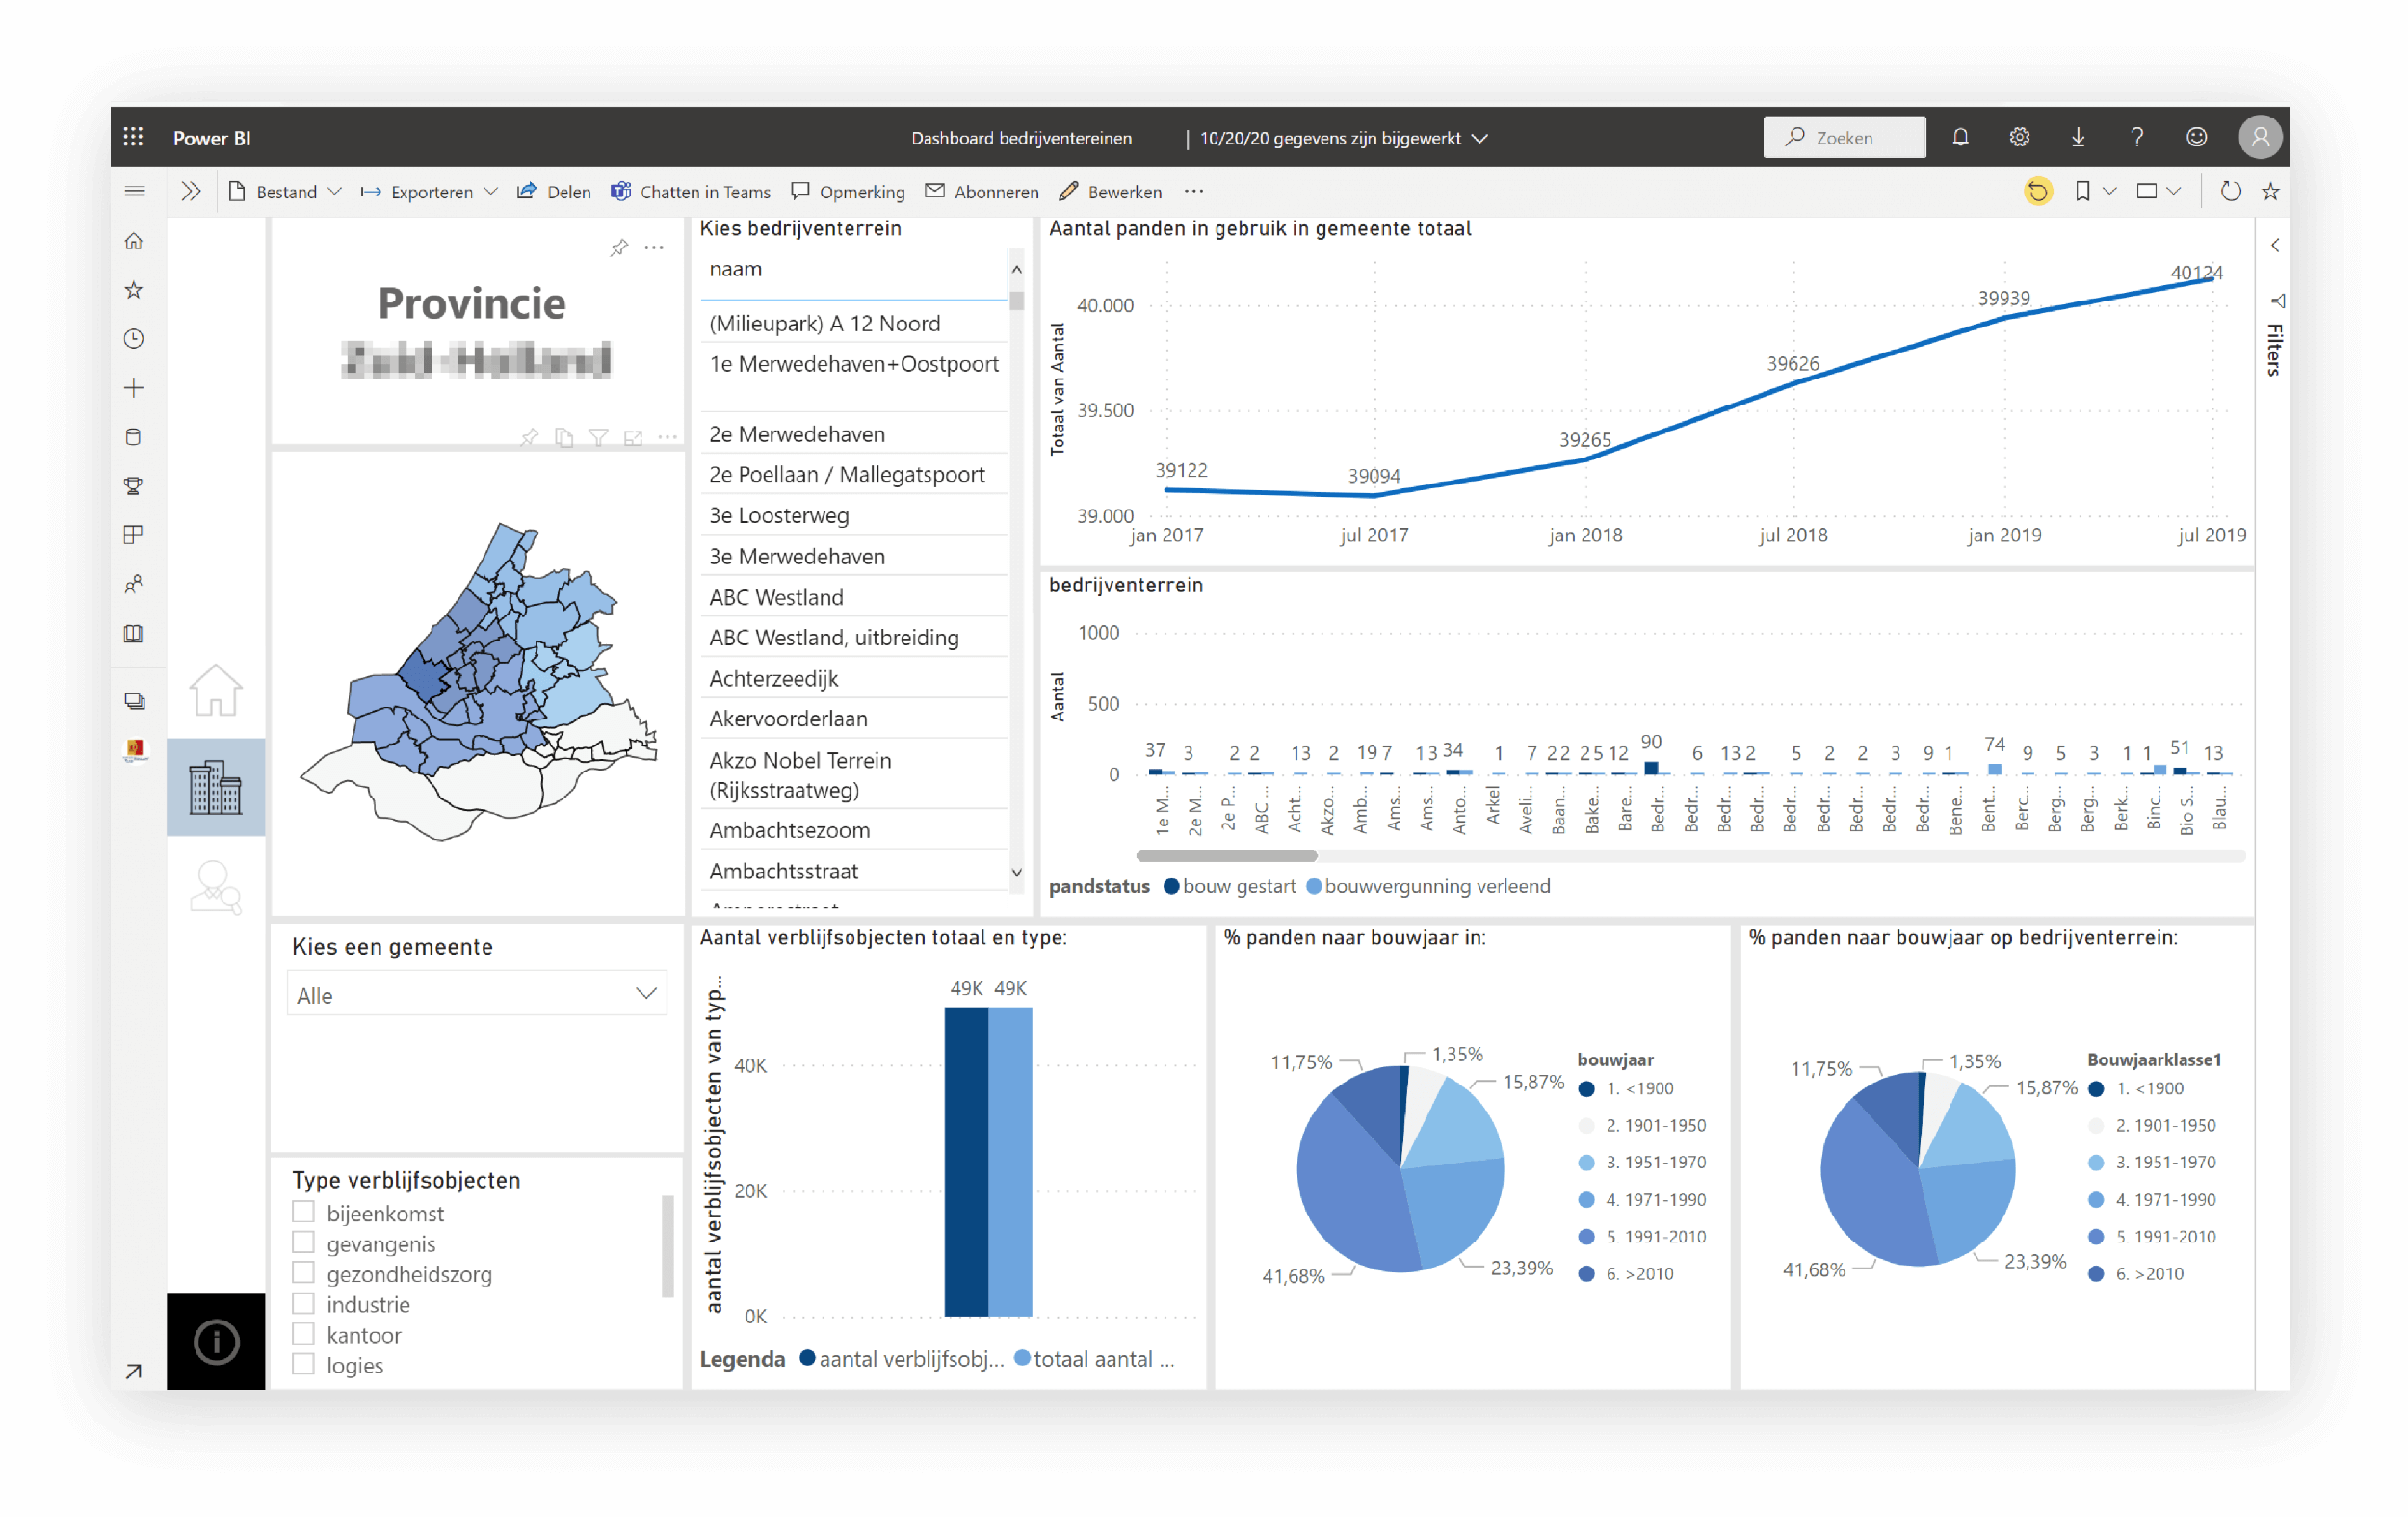 Example of a BI dashboard developed for a province